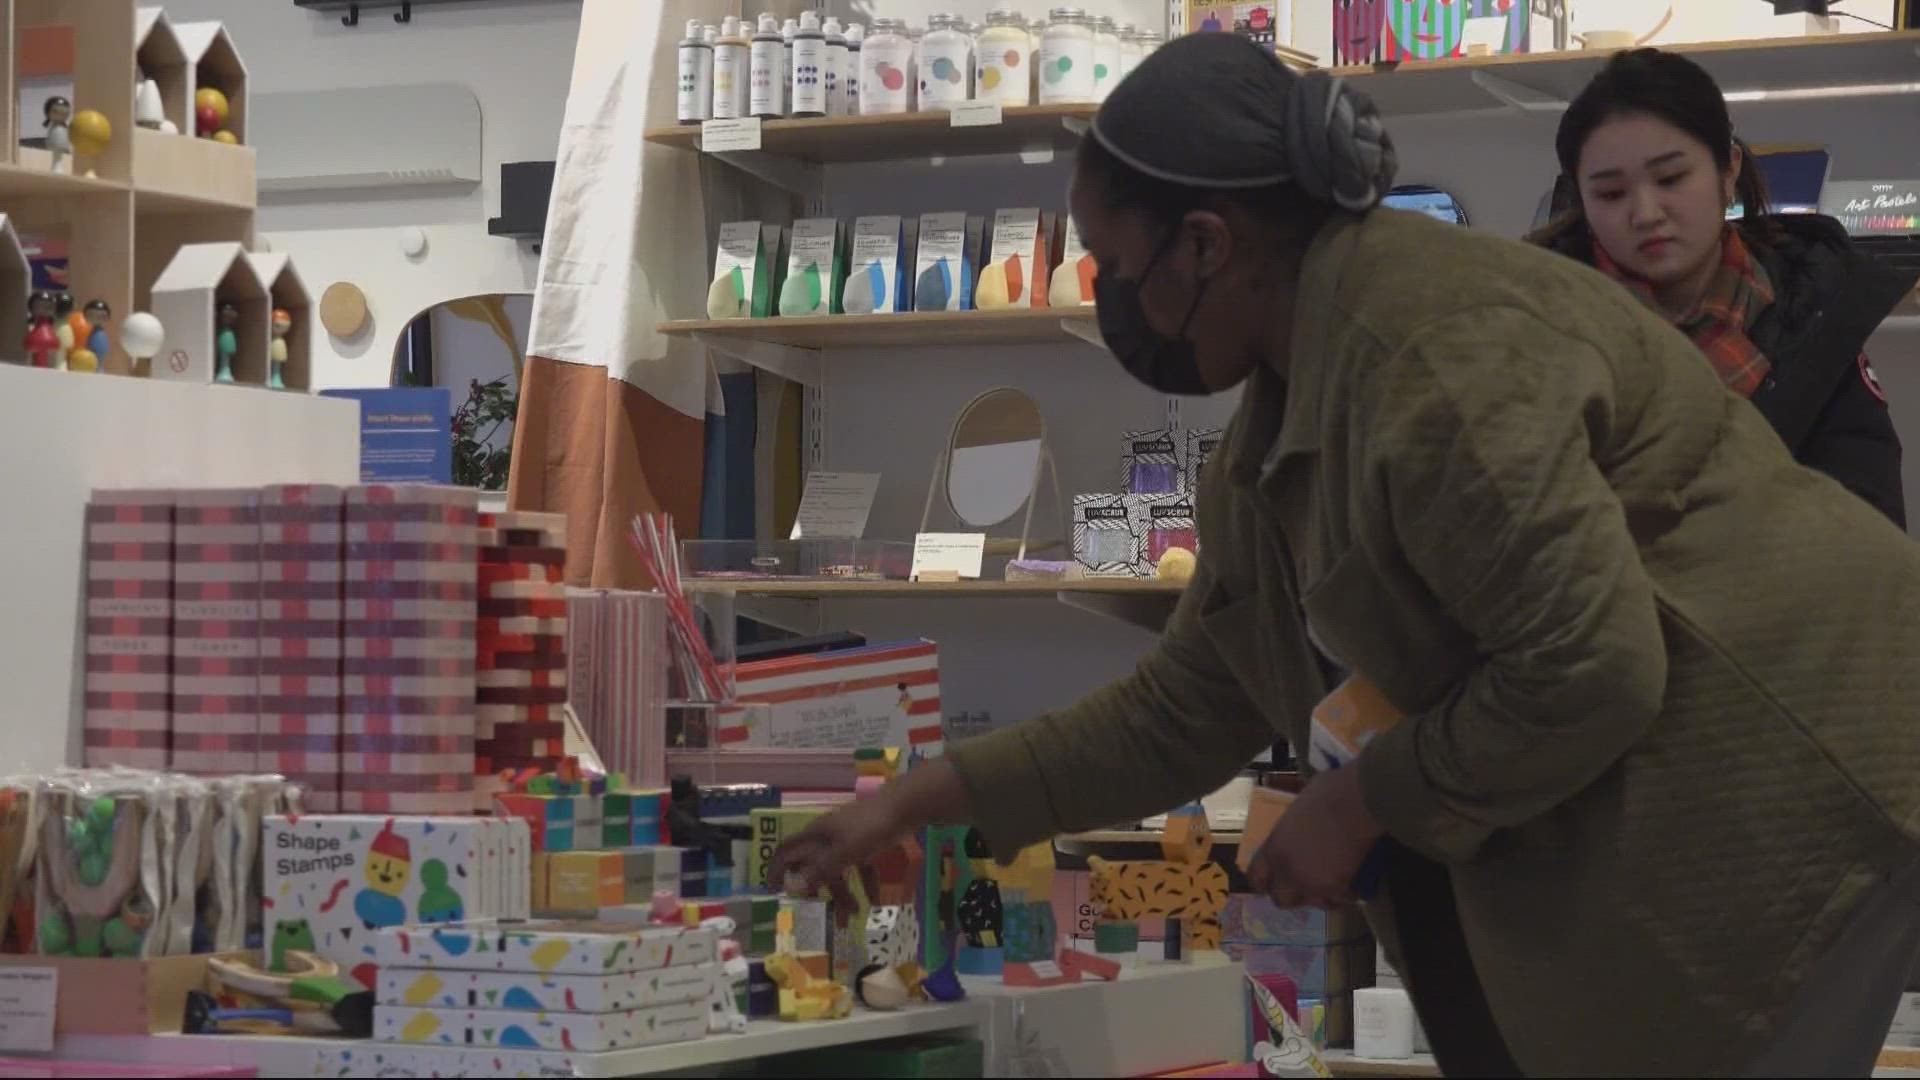 KGW spoke to Portland business owners about their experiences with in-person and online shopping since the pandemic.